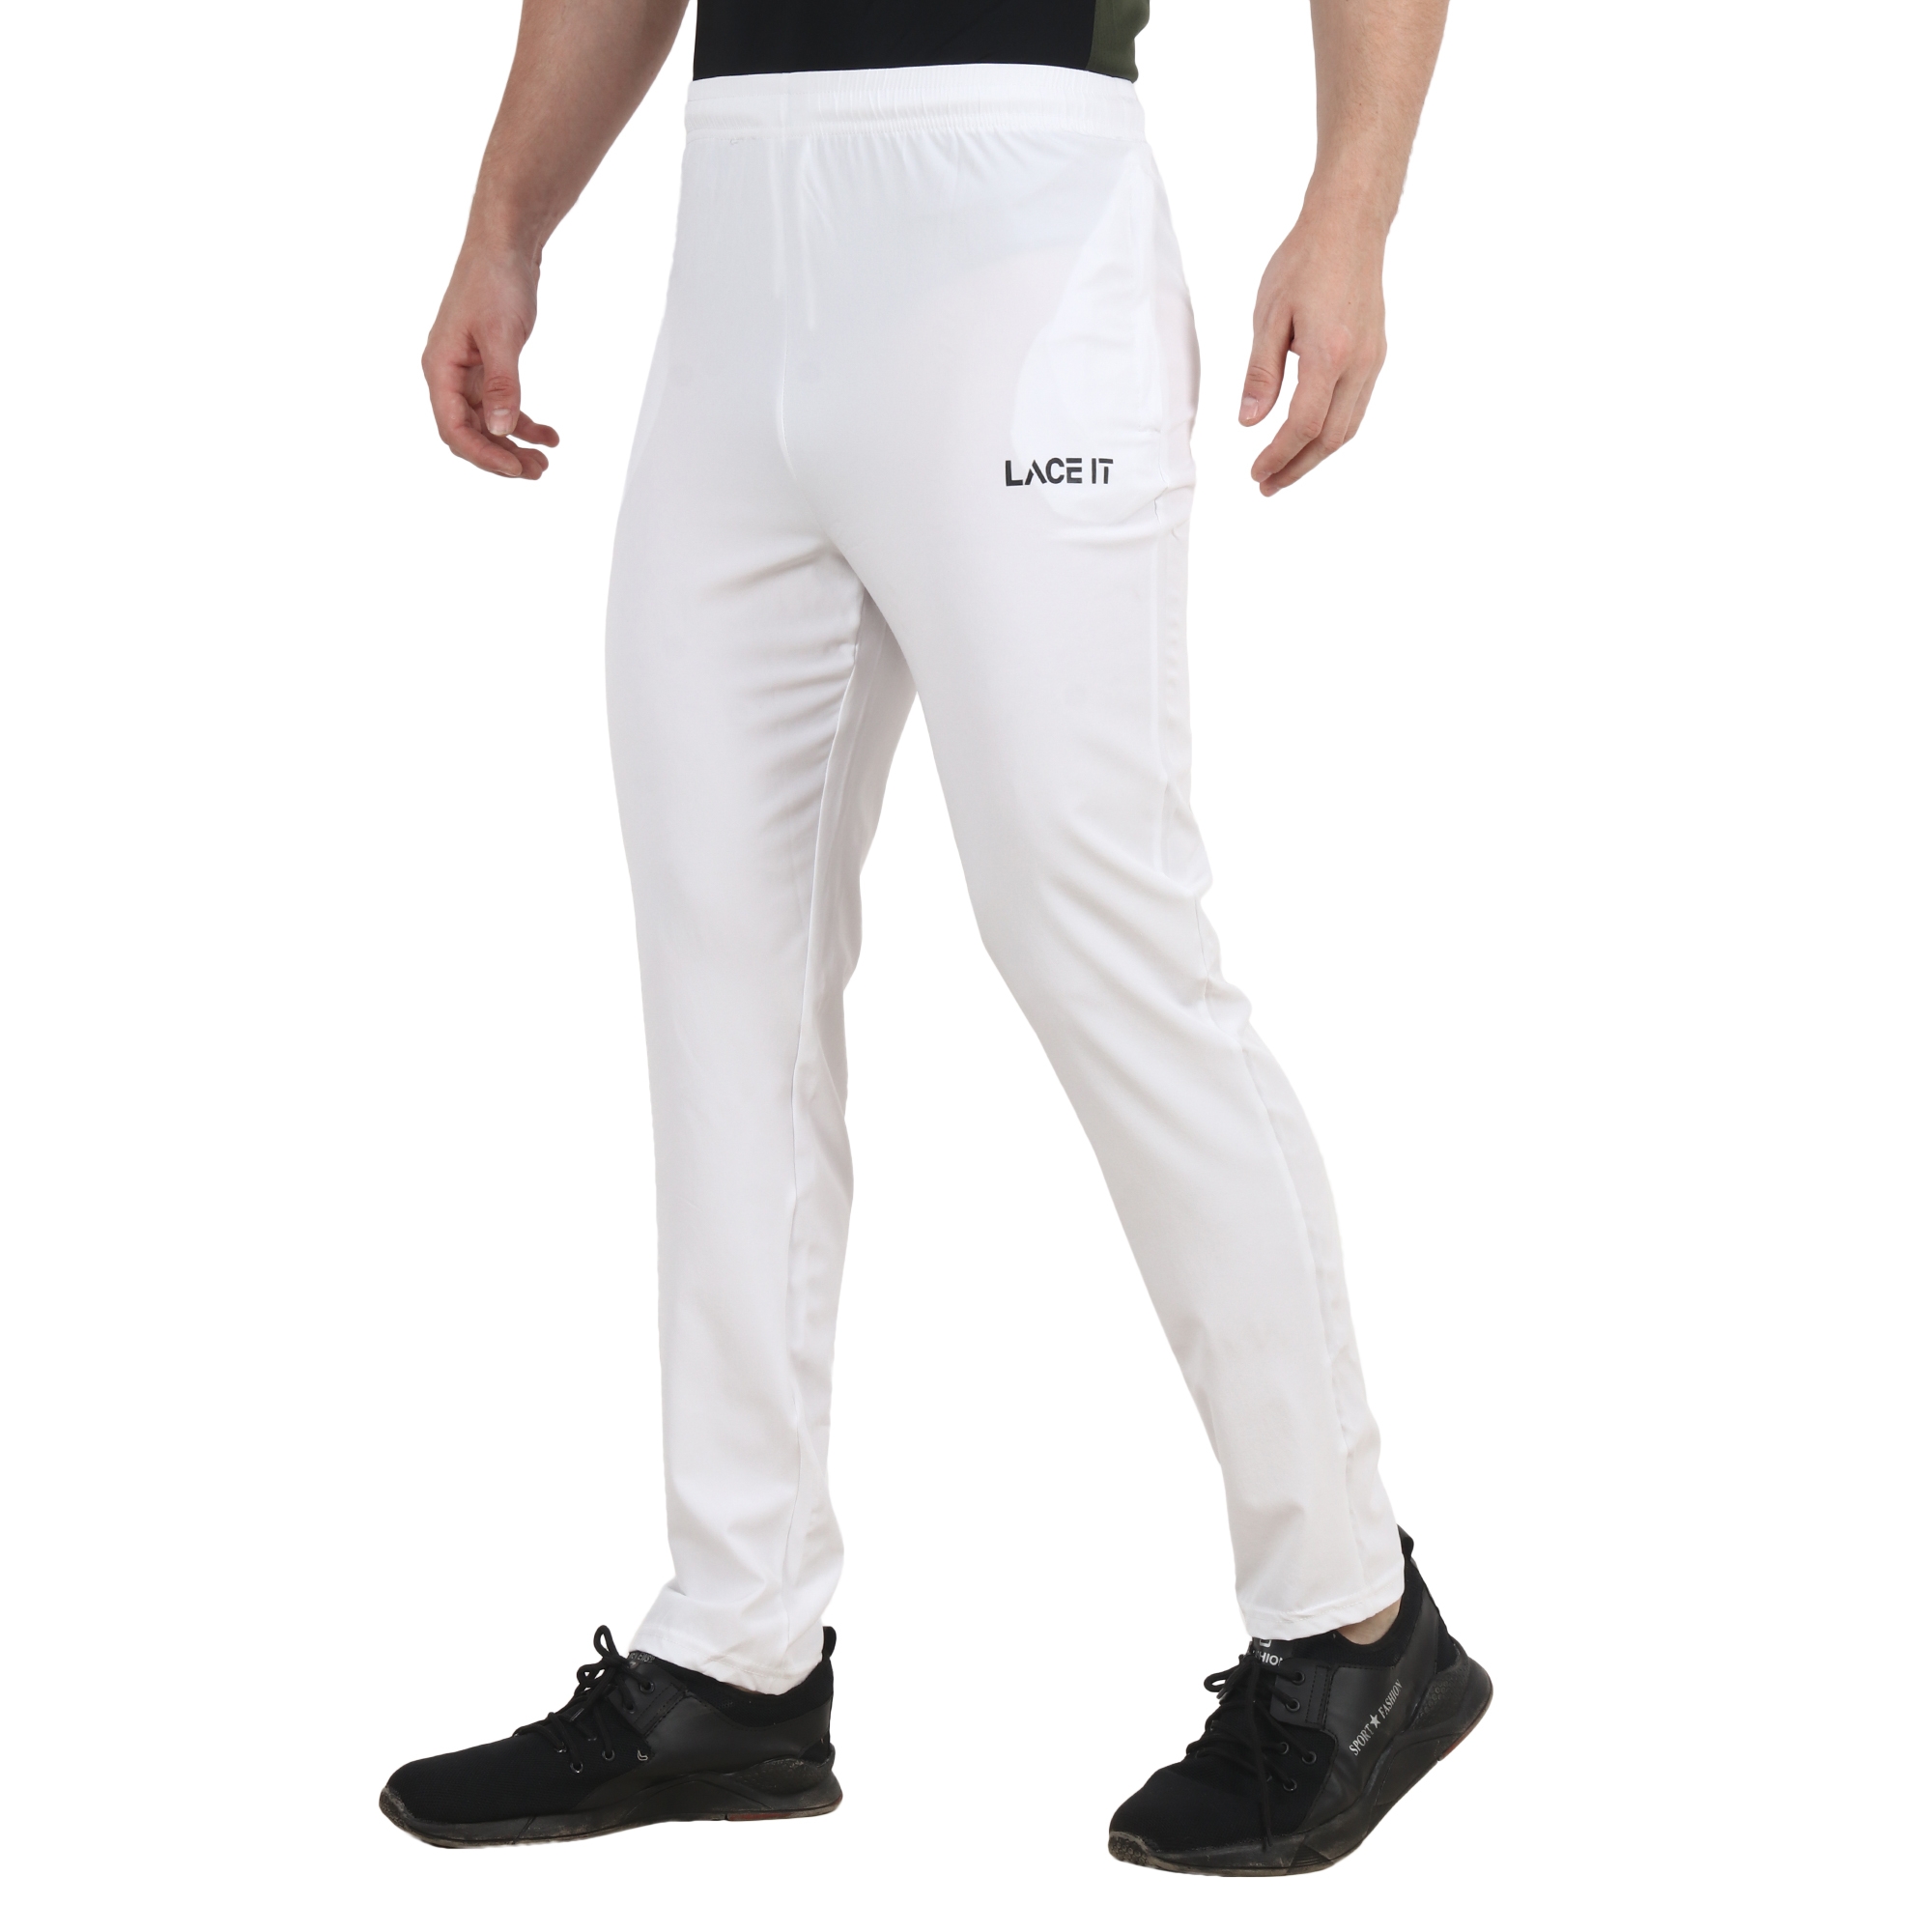 New North Black & White Stripes Adjustable Track Pants for Men : Amazon.in:  Clothing & Accessories